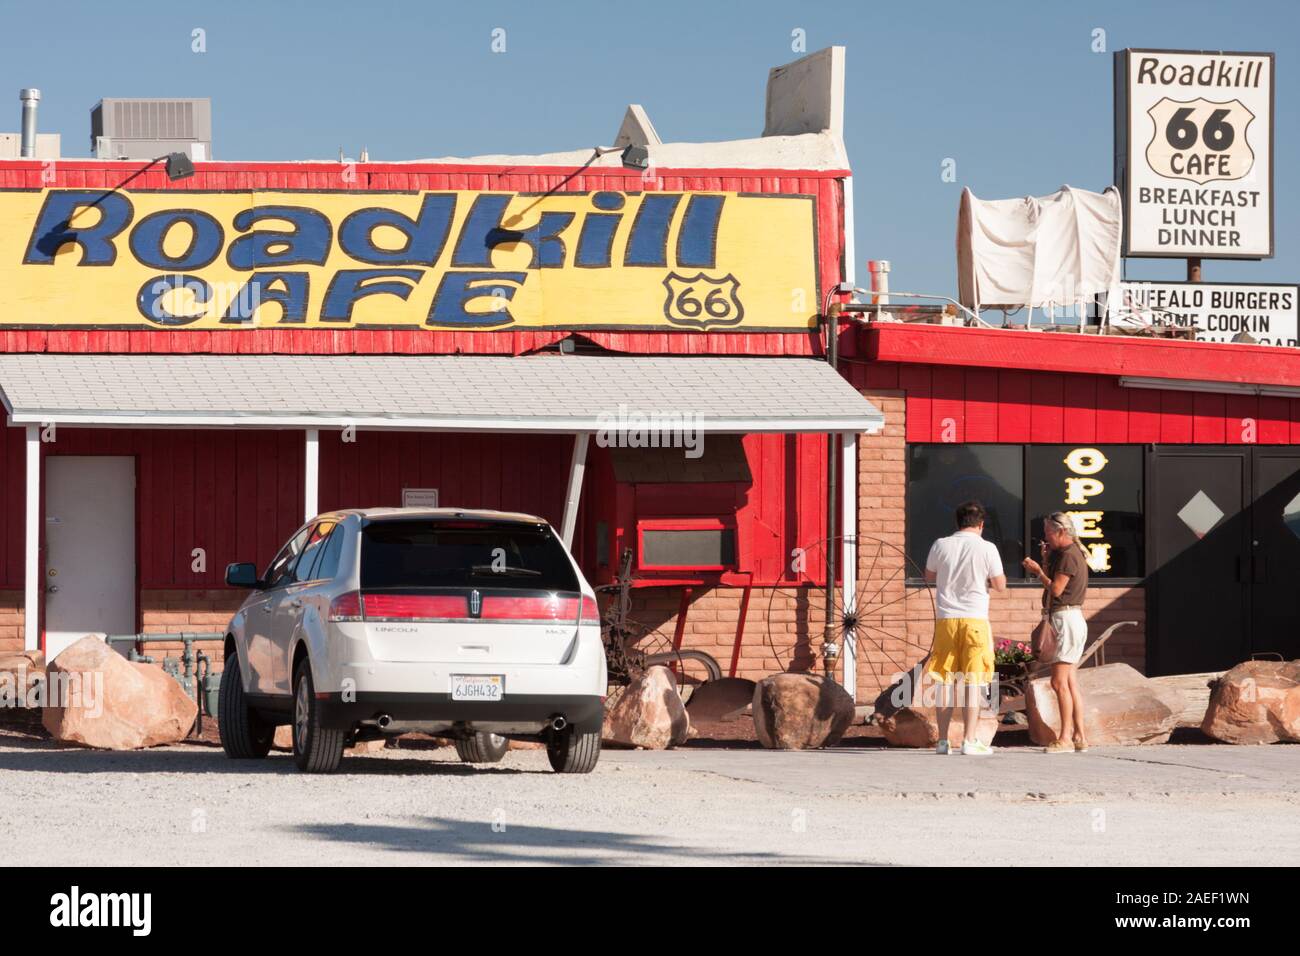 SELIGMAN, ARIZONA-OCTOBER 8, 2009: The Roadkill Cafe a quirky restaurant along Route 66 on October 8, 2009 in Seligman, Arizona. Stock Photo